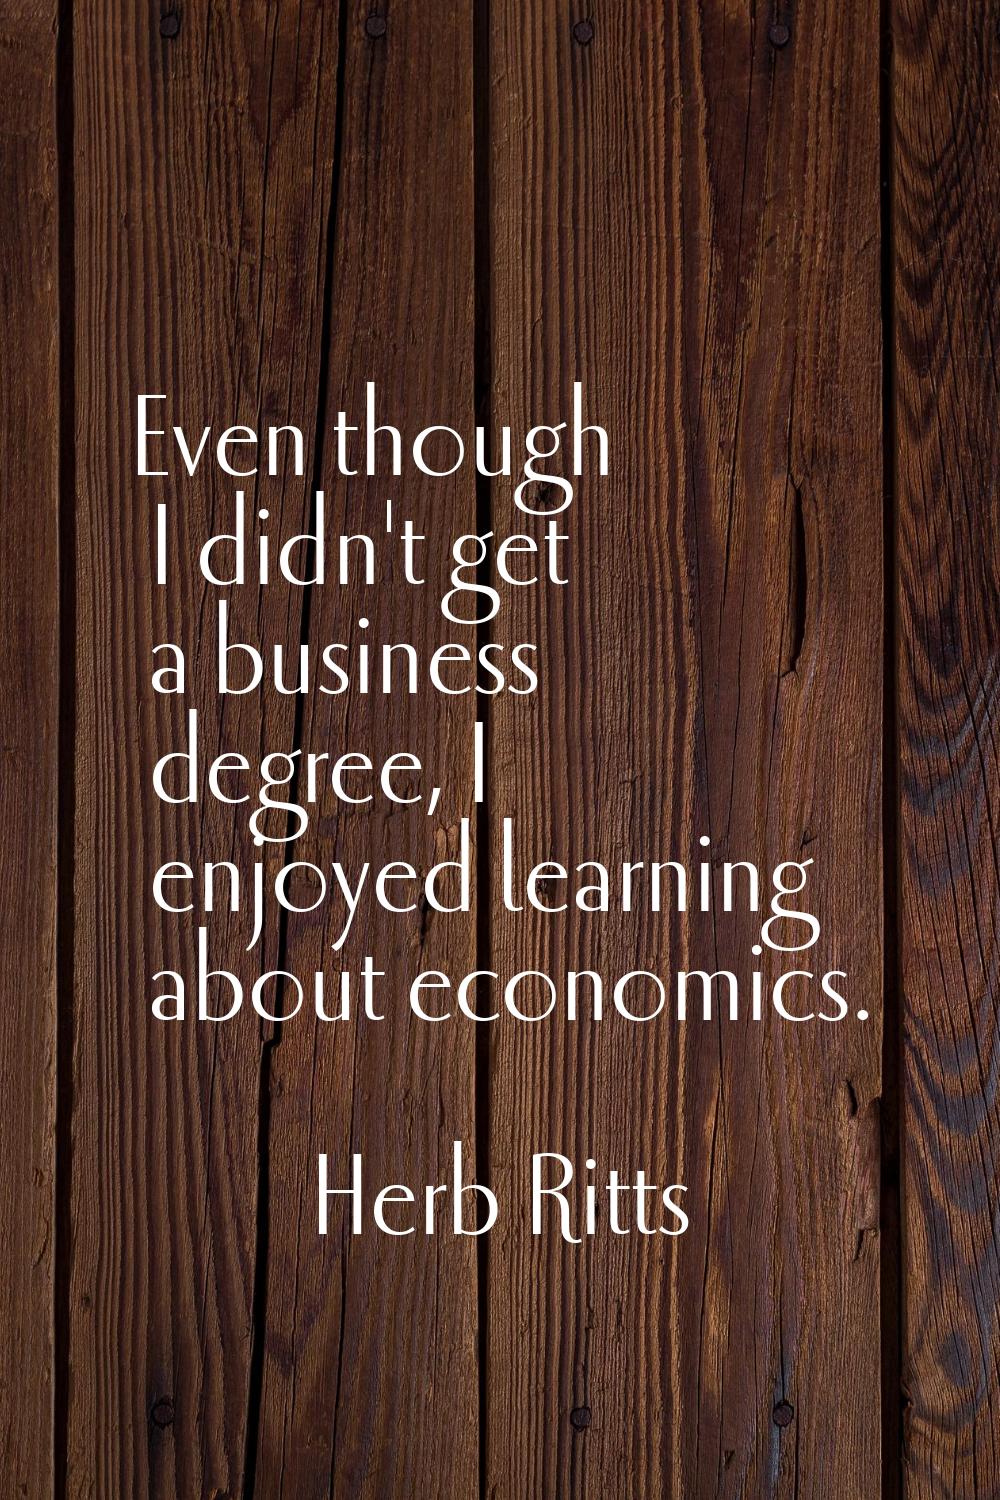 Even though I didn't get a business degree, I enjoyed learning about economics.